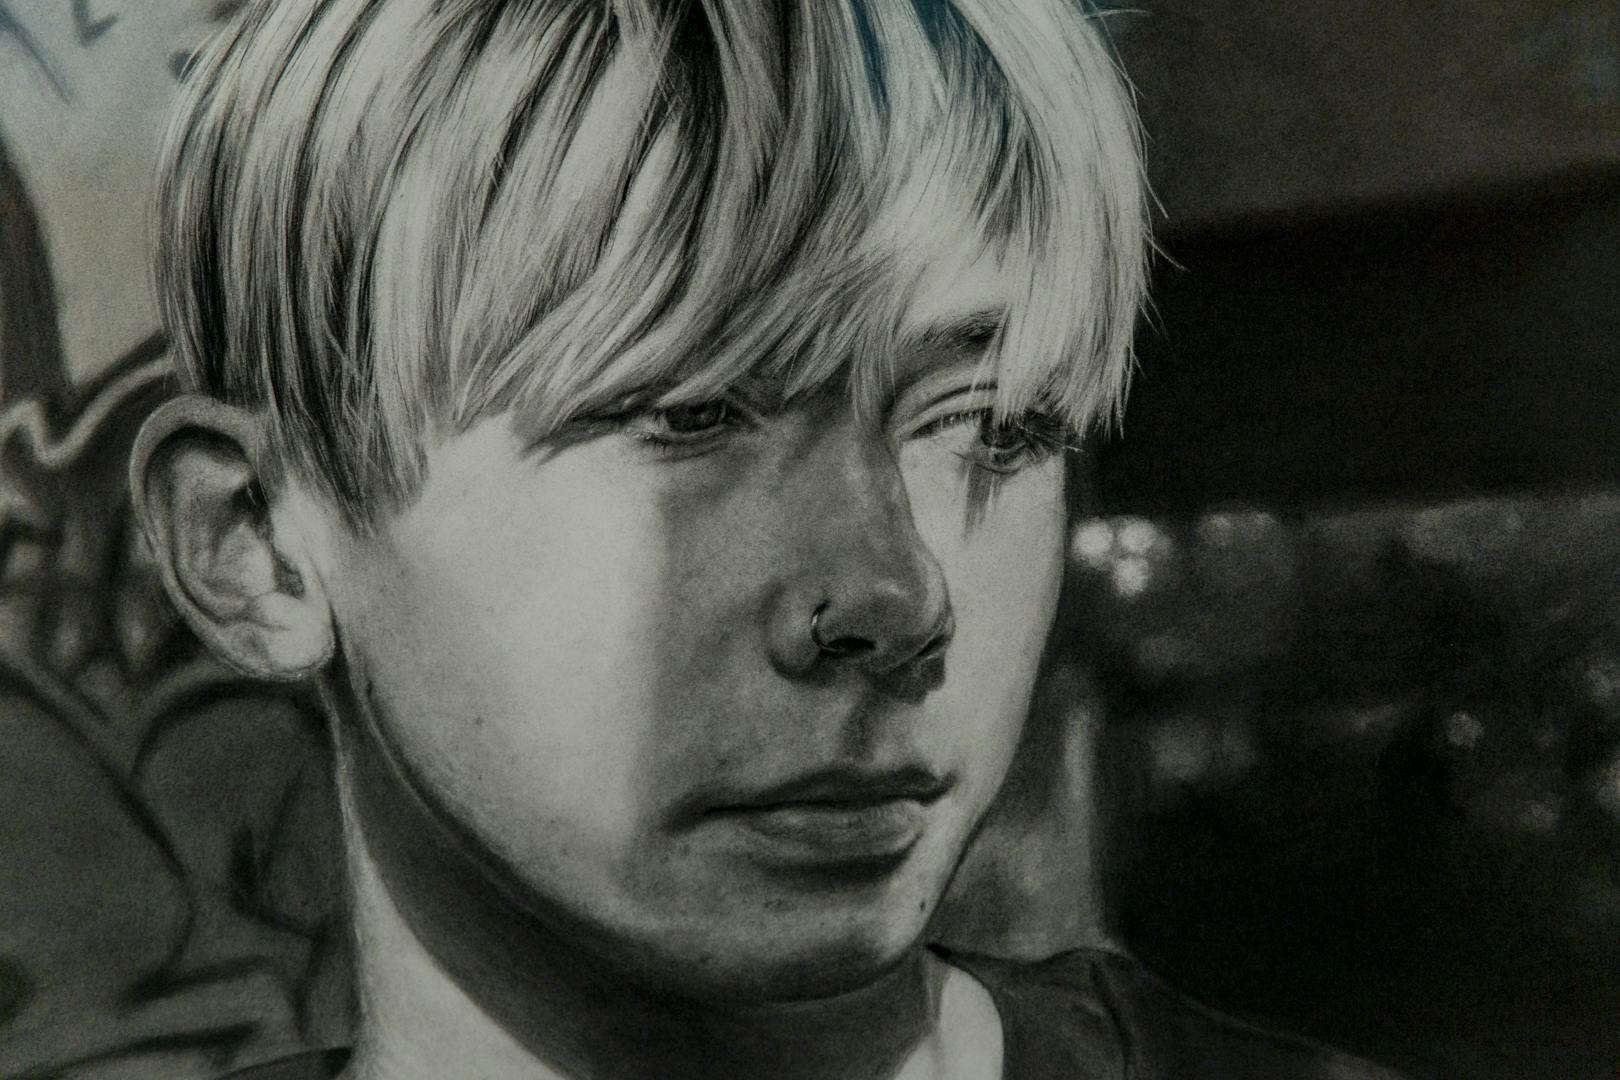 Image shows a black and white hand drawn image of a young boy with light coloured hair looking emotional